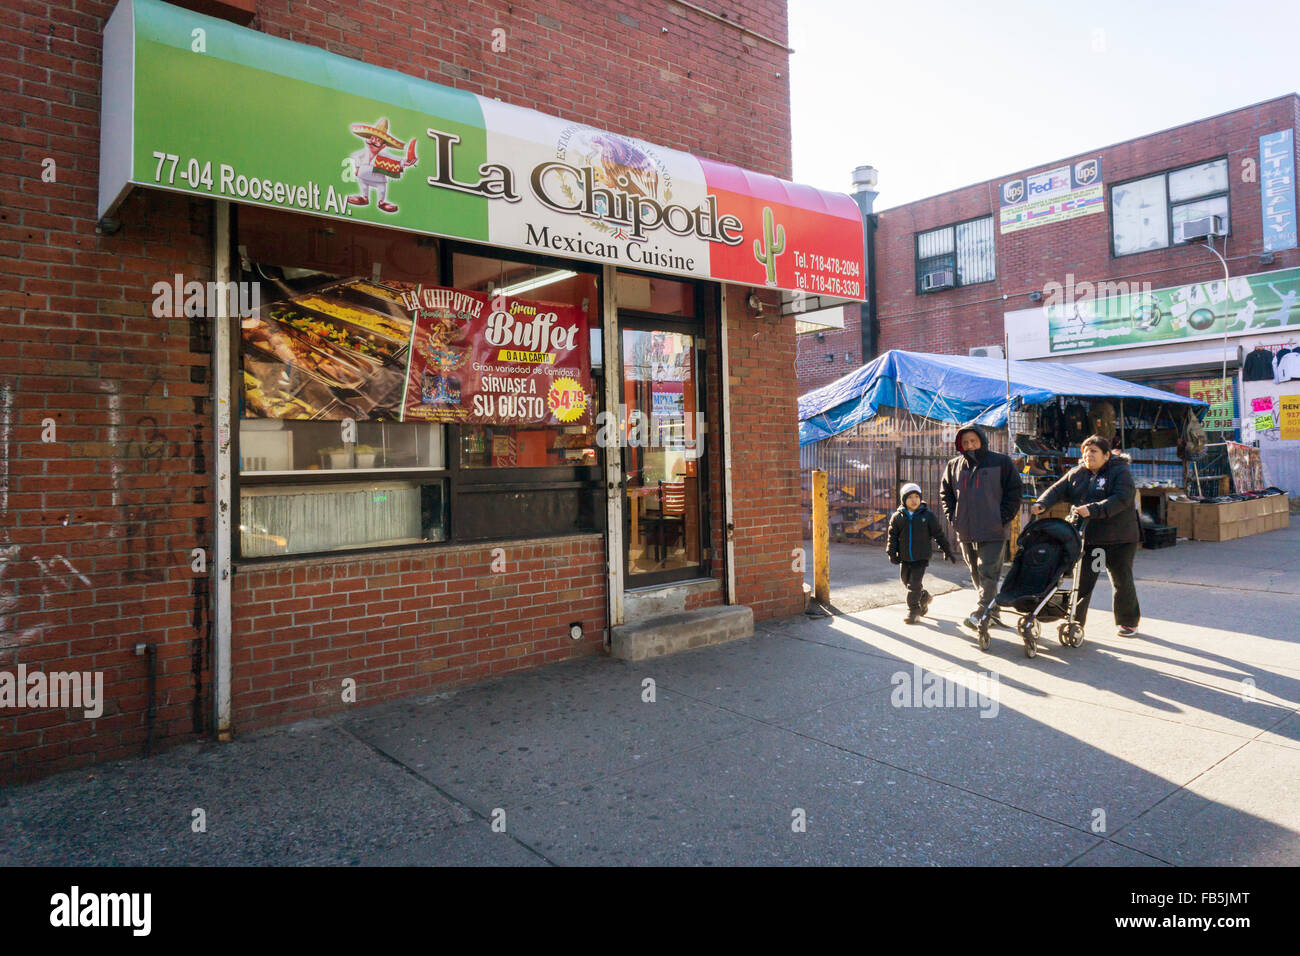 La Chipotle Mexican restaurant under the elevated Number 7 train in the Jackson Heights neighborhood in Queens in New York on Sunday, January 3, 2016. The Jackson Heights neighborhood is home to a mosaic of ethnic groups. (© Richard B. Levine) Stock Photo